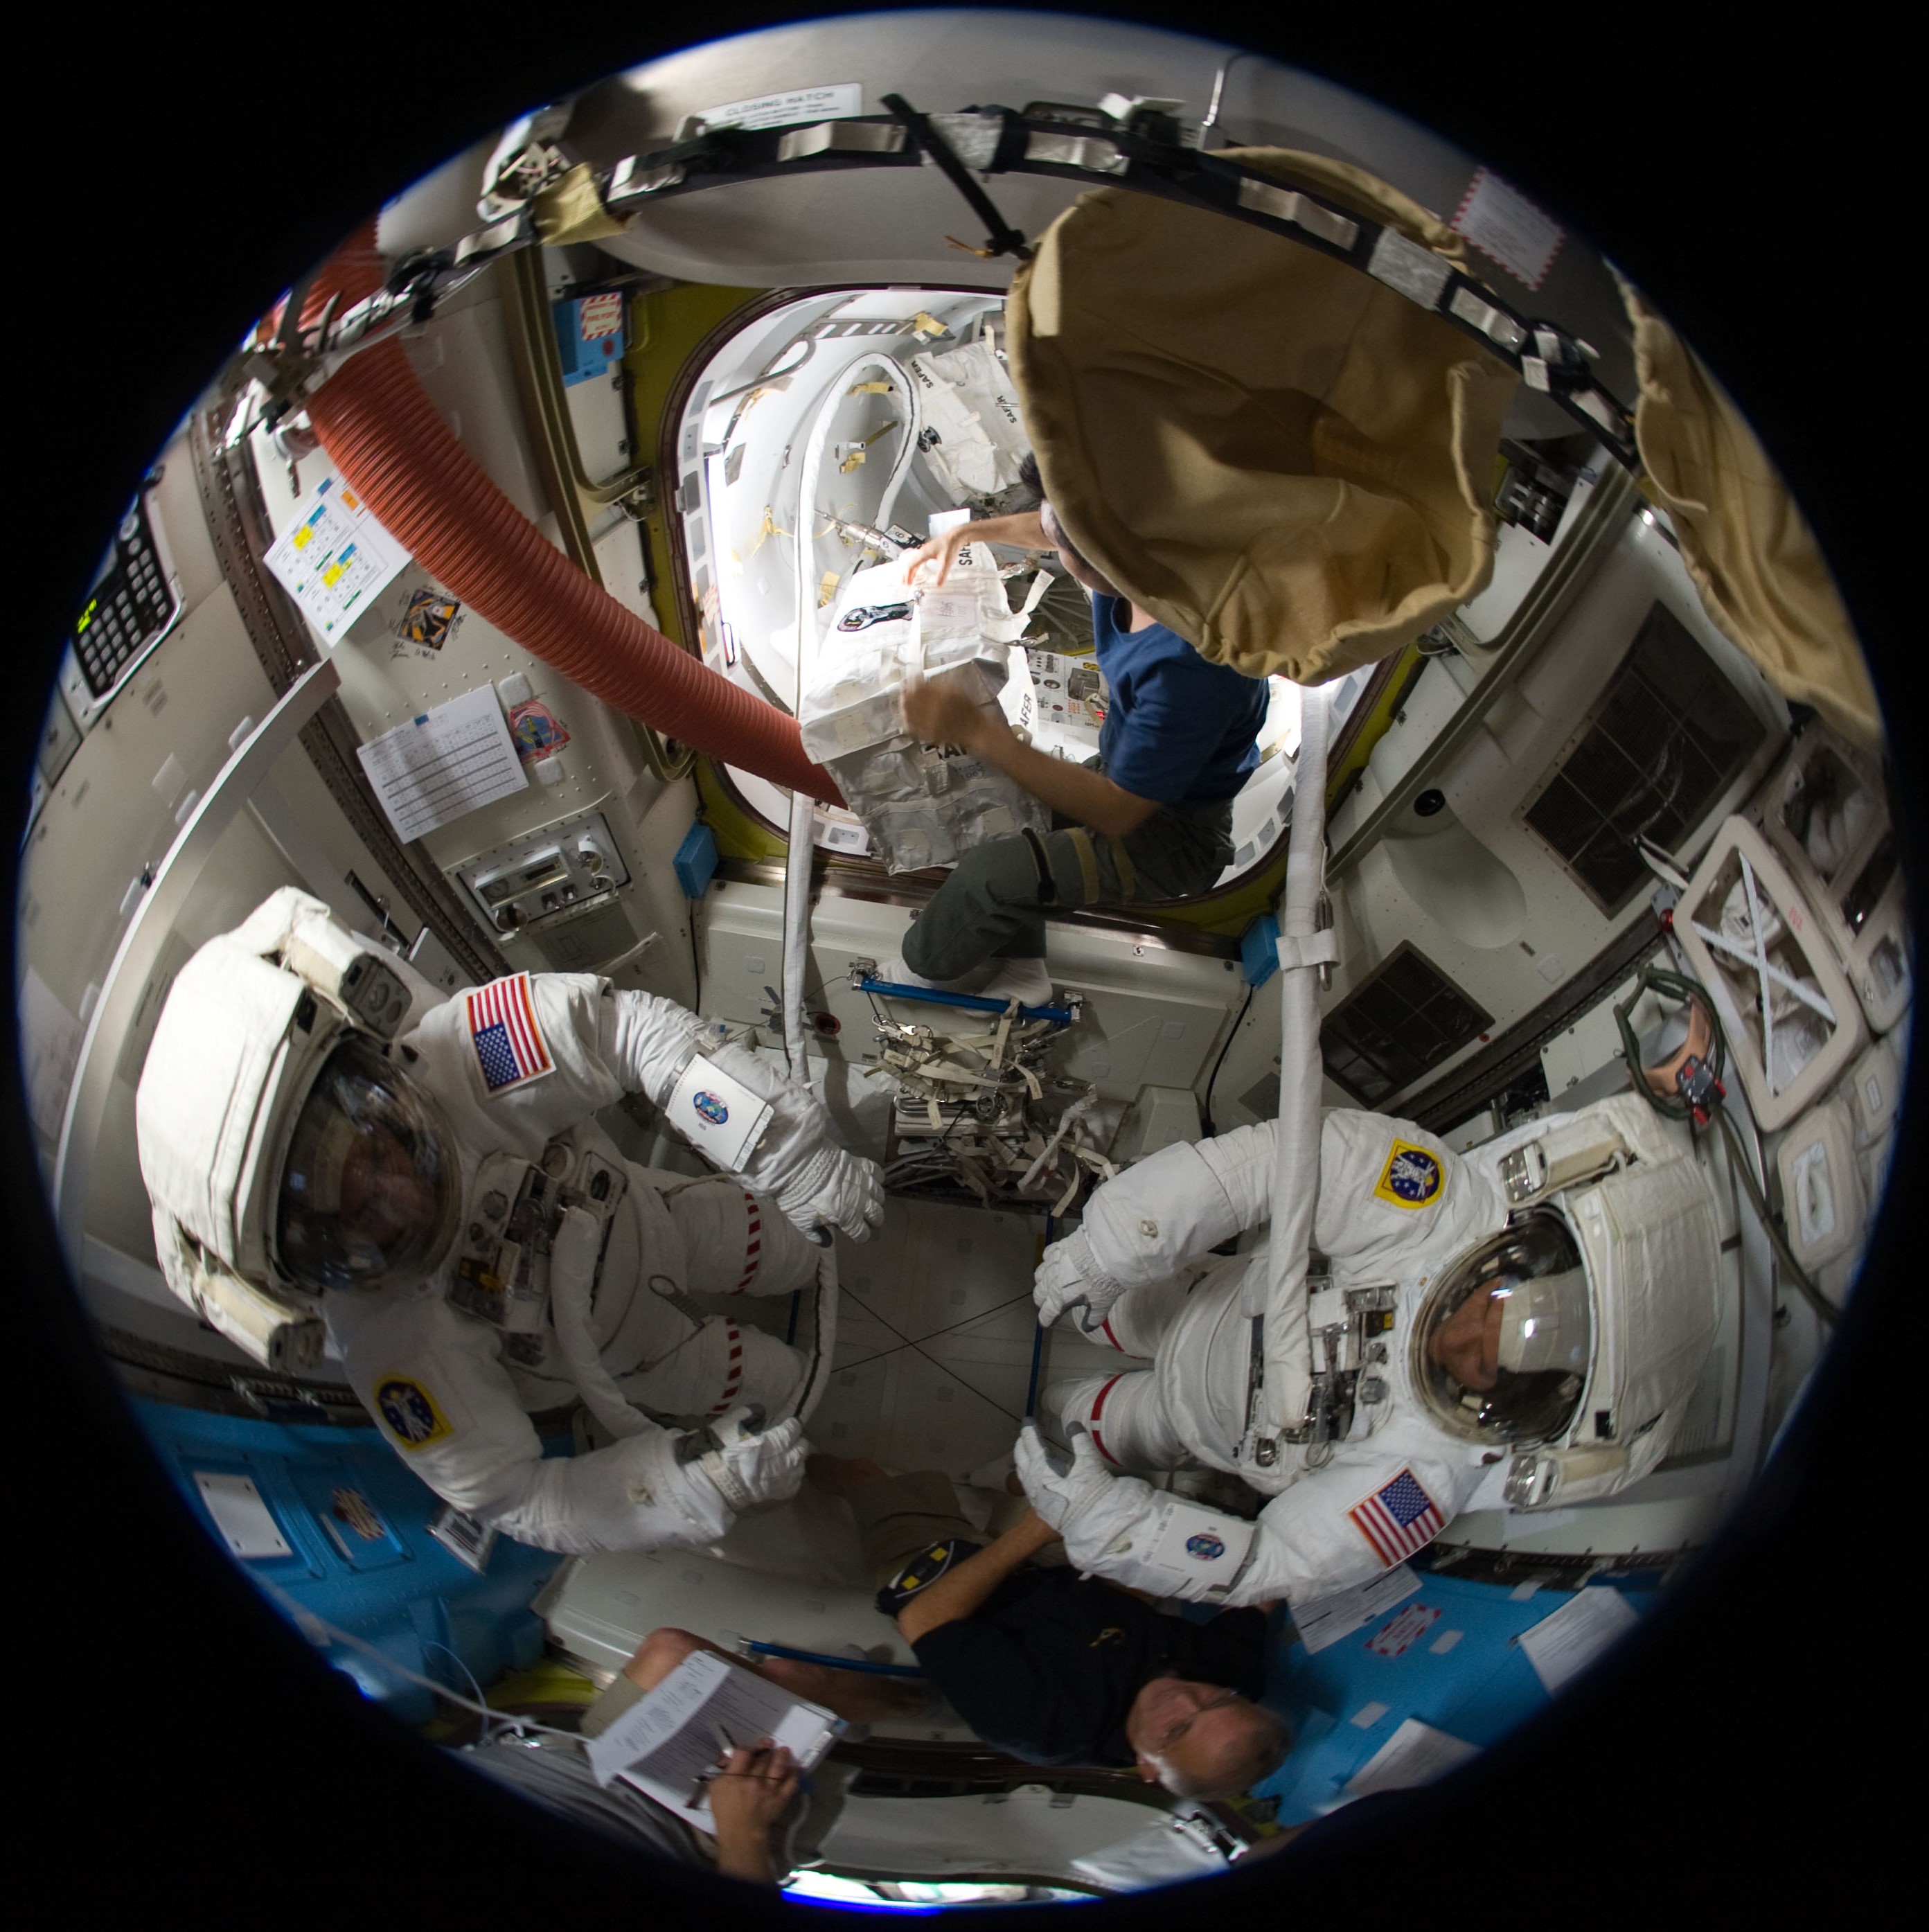 Fisheye view of Christopher J. Cassidy, left, and Thomas H. Marshburn in the U.S. Airlock preparing for the mission’s fifth and final spacewalk